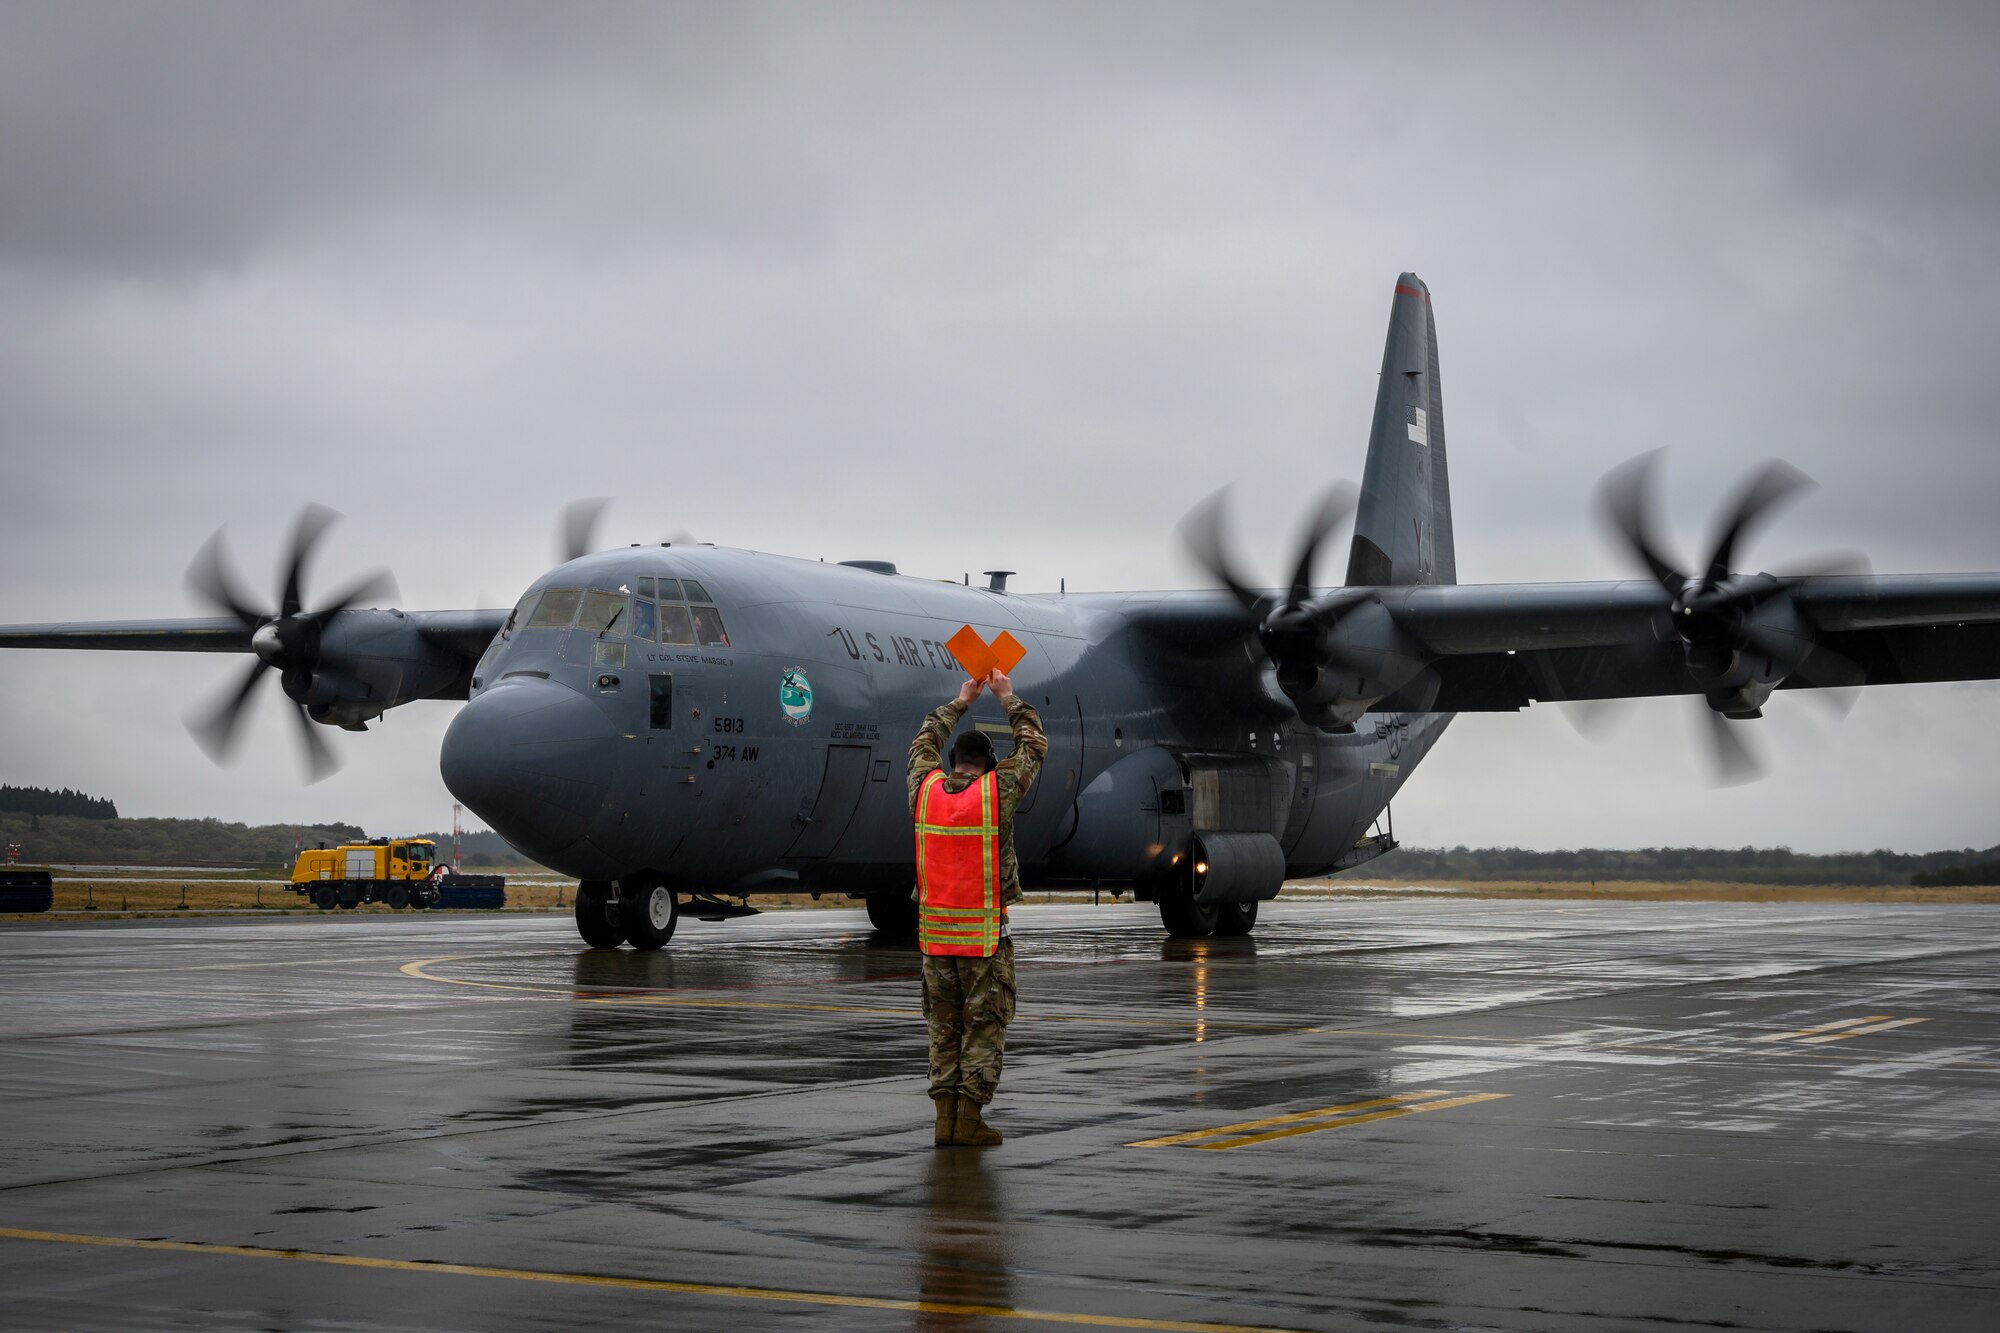 A U.S. Air Force Airman marshals a C-130J Super Hercules from the 374th Airlift Wing during the Beverly Sunrise 21-05 Readiness Exercise at Misawa Air Base, Japan, May 2, 2021. The C-130s are transporting cargo and personnel to support the 35th Fighter Wing’s Agile Combat Employment capabilities. (U.S. Air Force photo by Airman 1st Class China M. Shock)